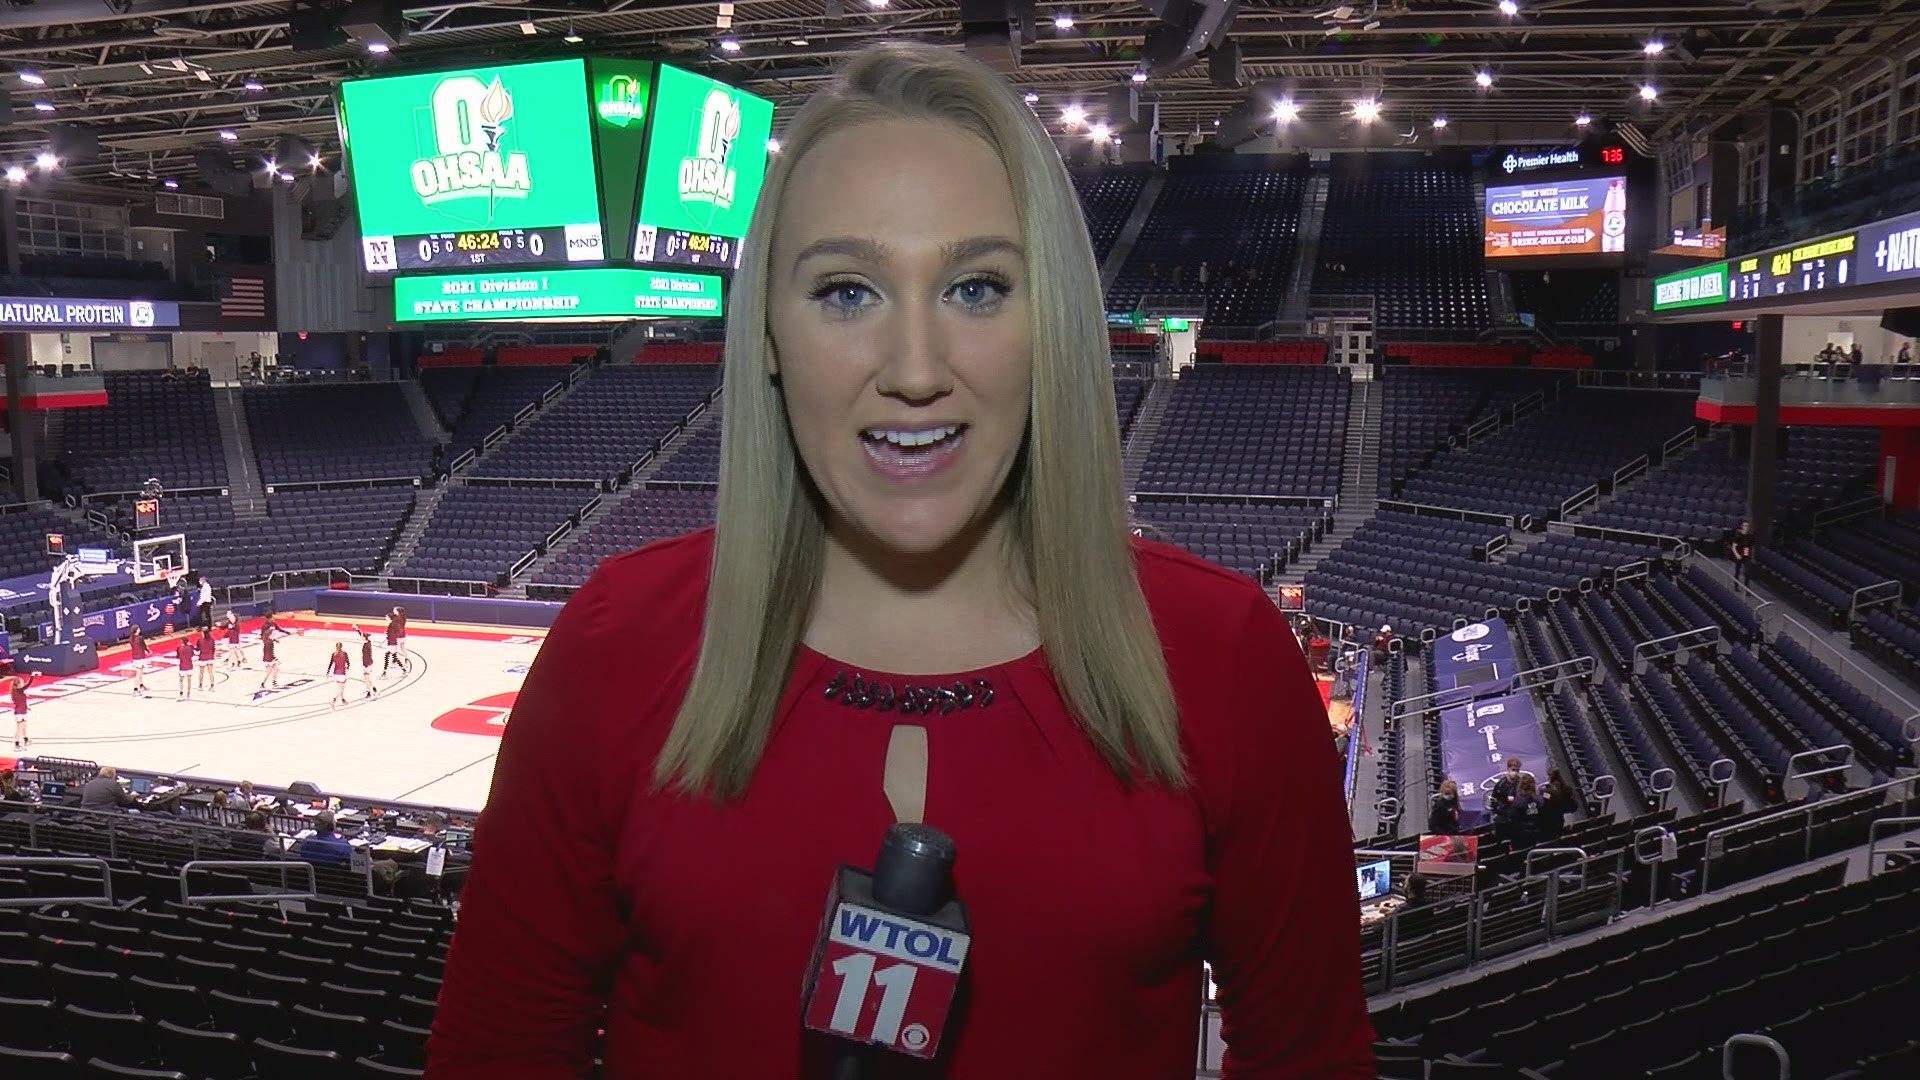 Kristi Kopanis brings you all the action from the hardwood to the ice as local teams continued their quest to bring home the hardware.